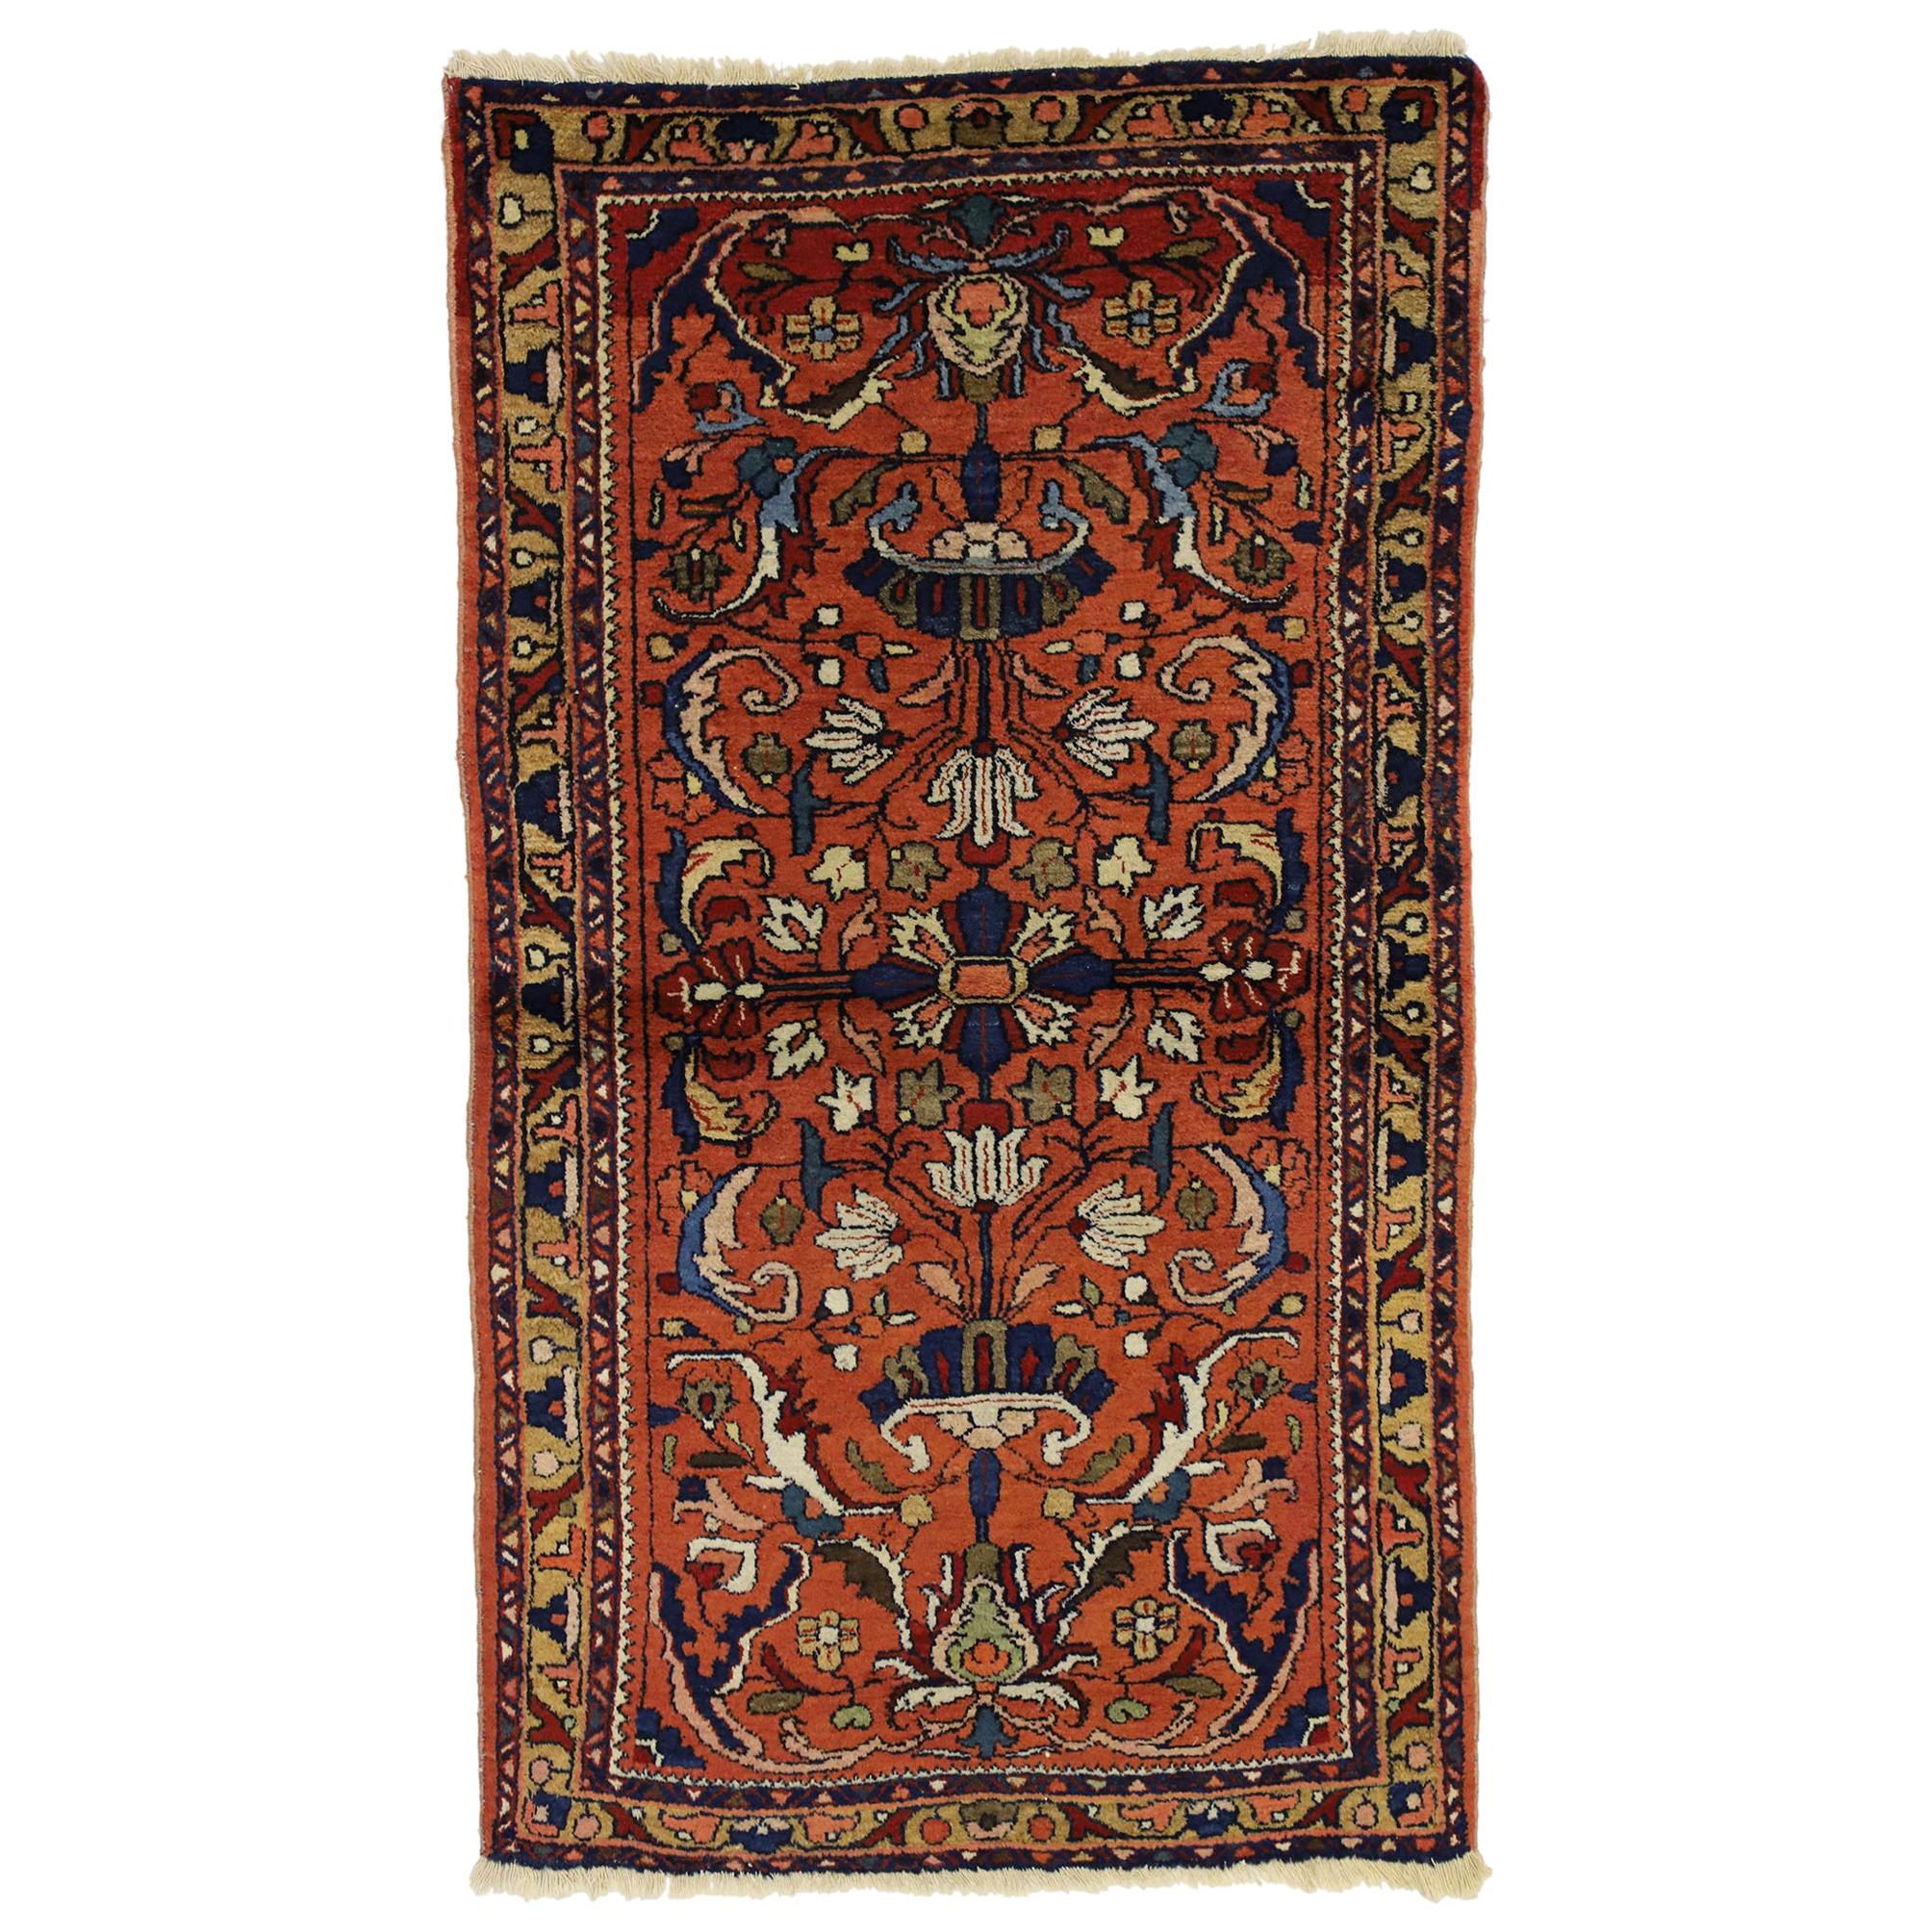 Antique Persian Lilihan Accent Rug with Traditional Style, Entry or Foyer Rug